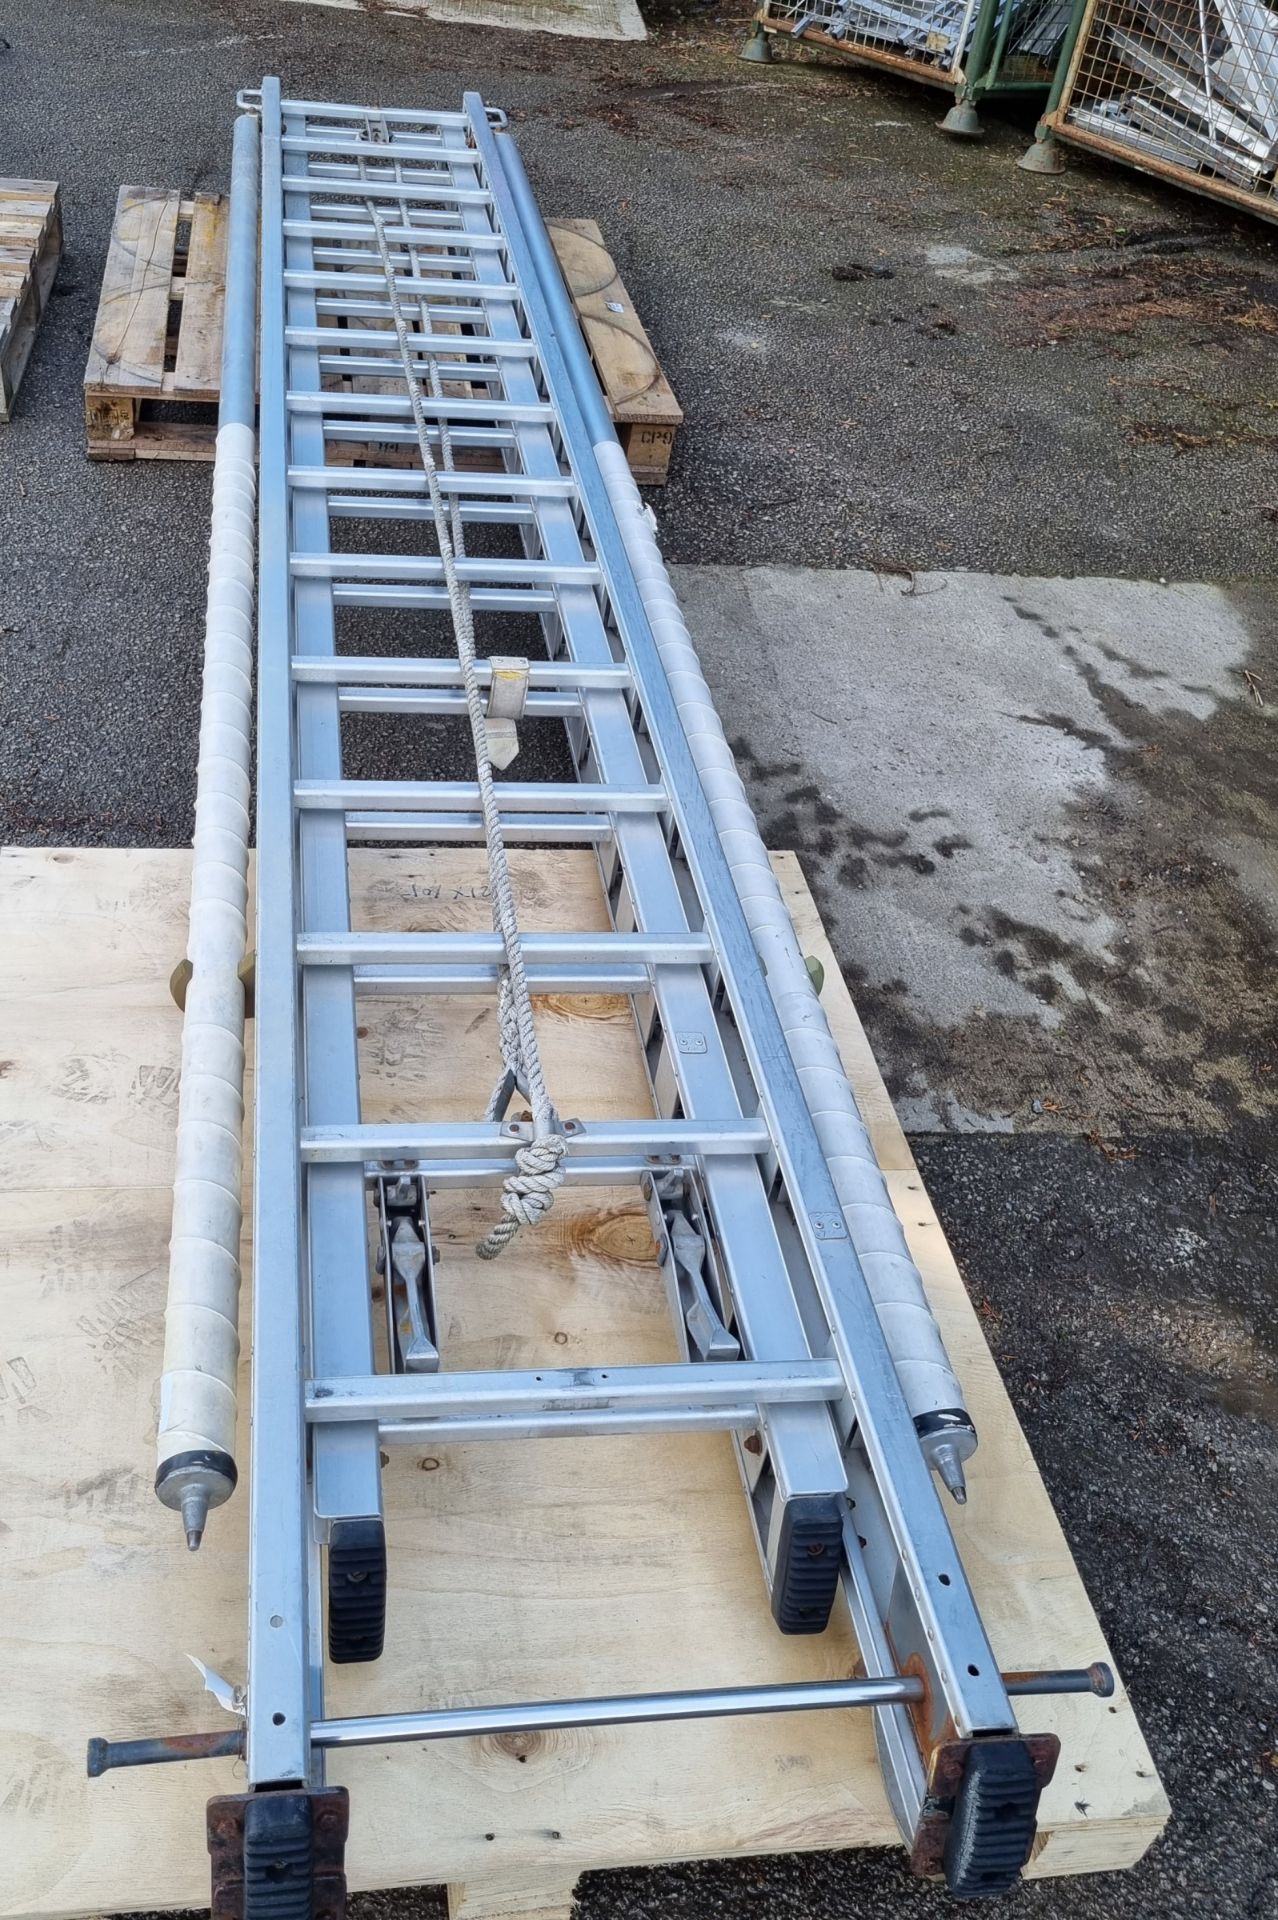 AS Fire & Rescue equipment ladder - 2 section - 14 rungs per section with side supports - approx 4M - Image 2 of 3